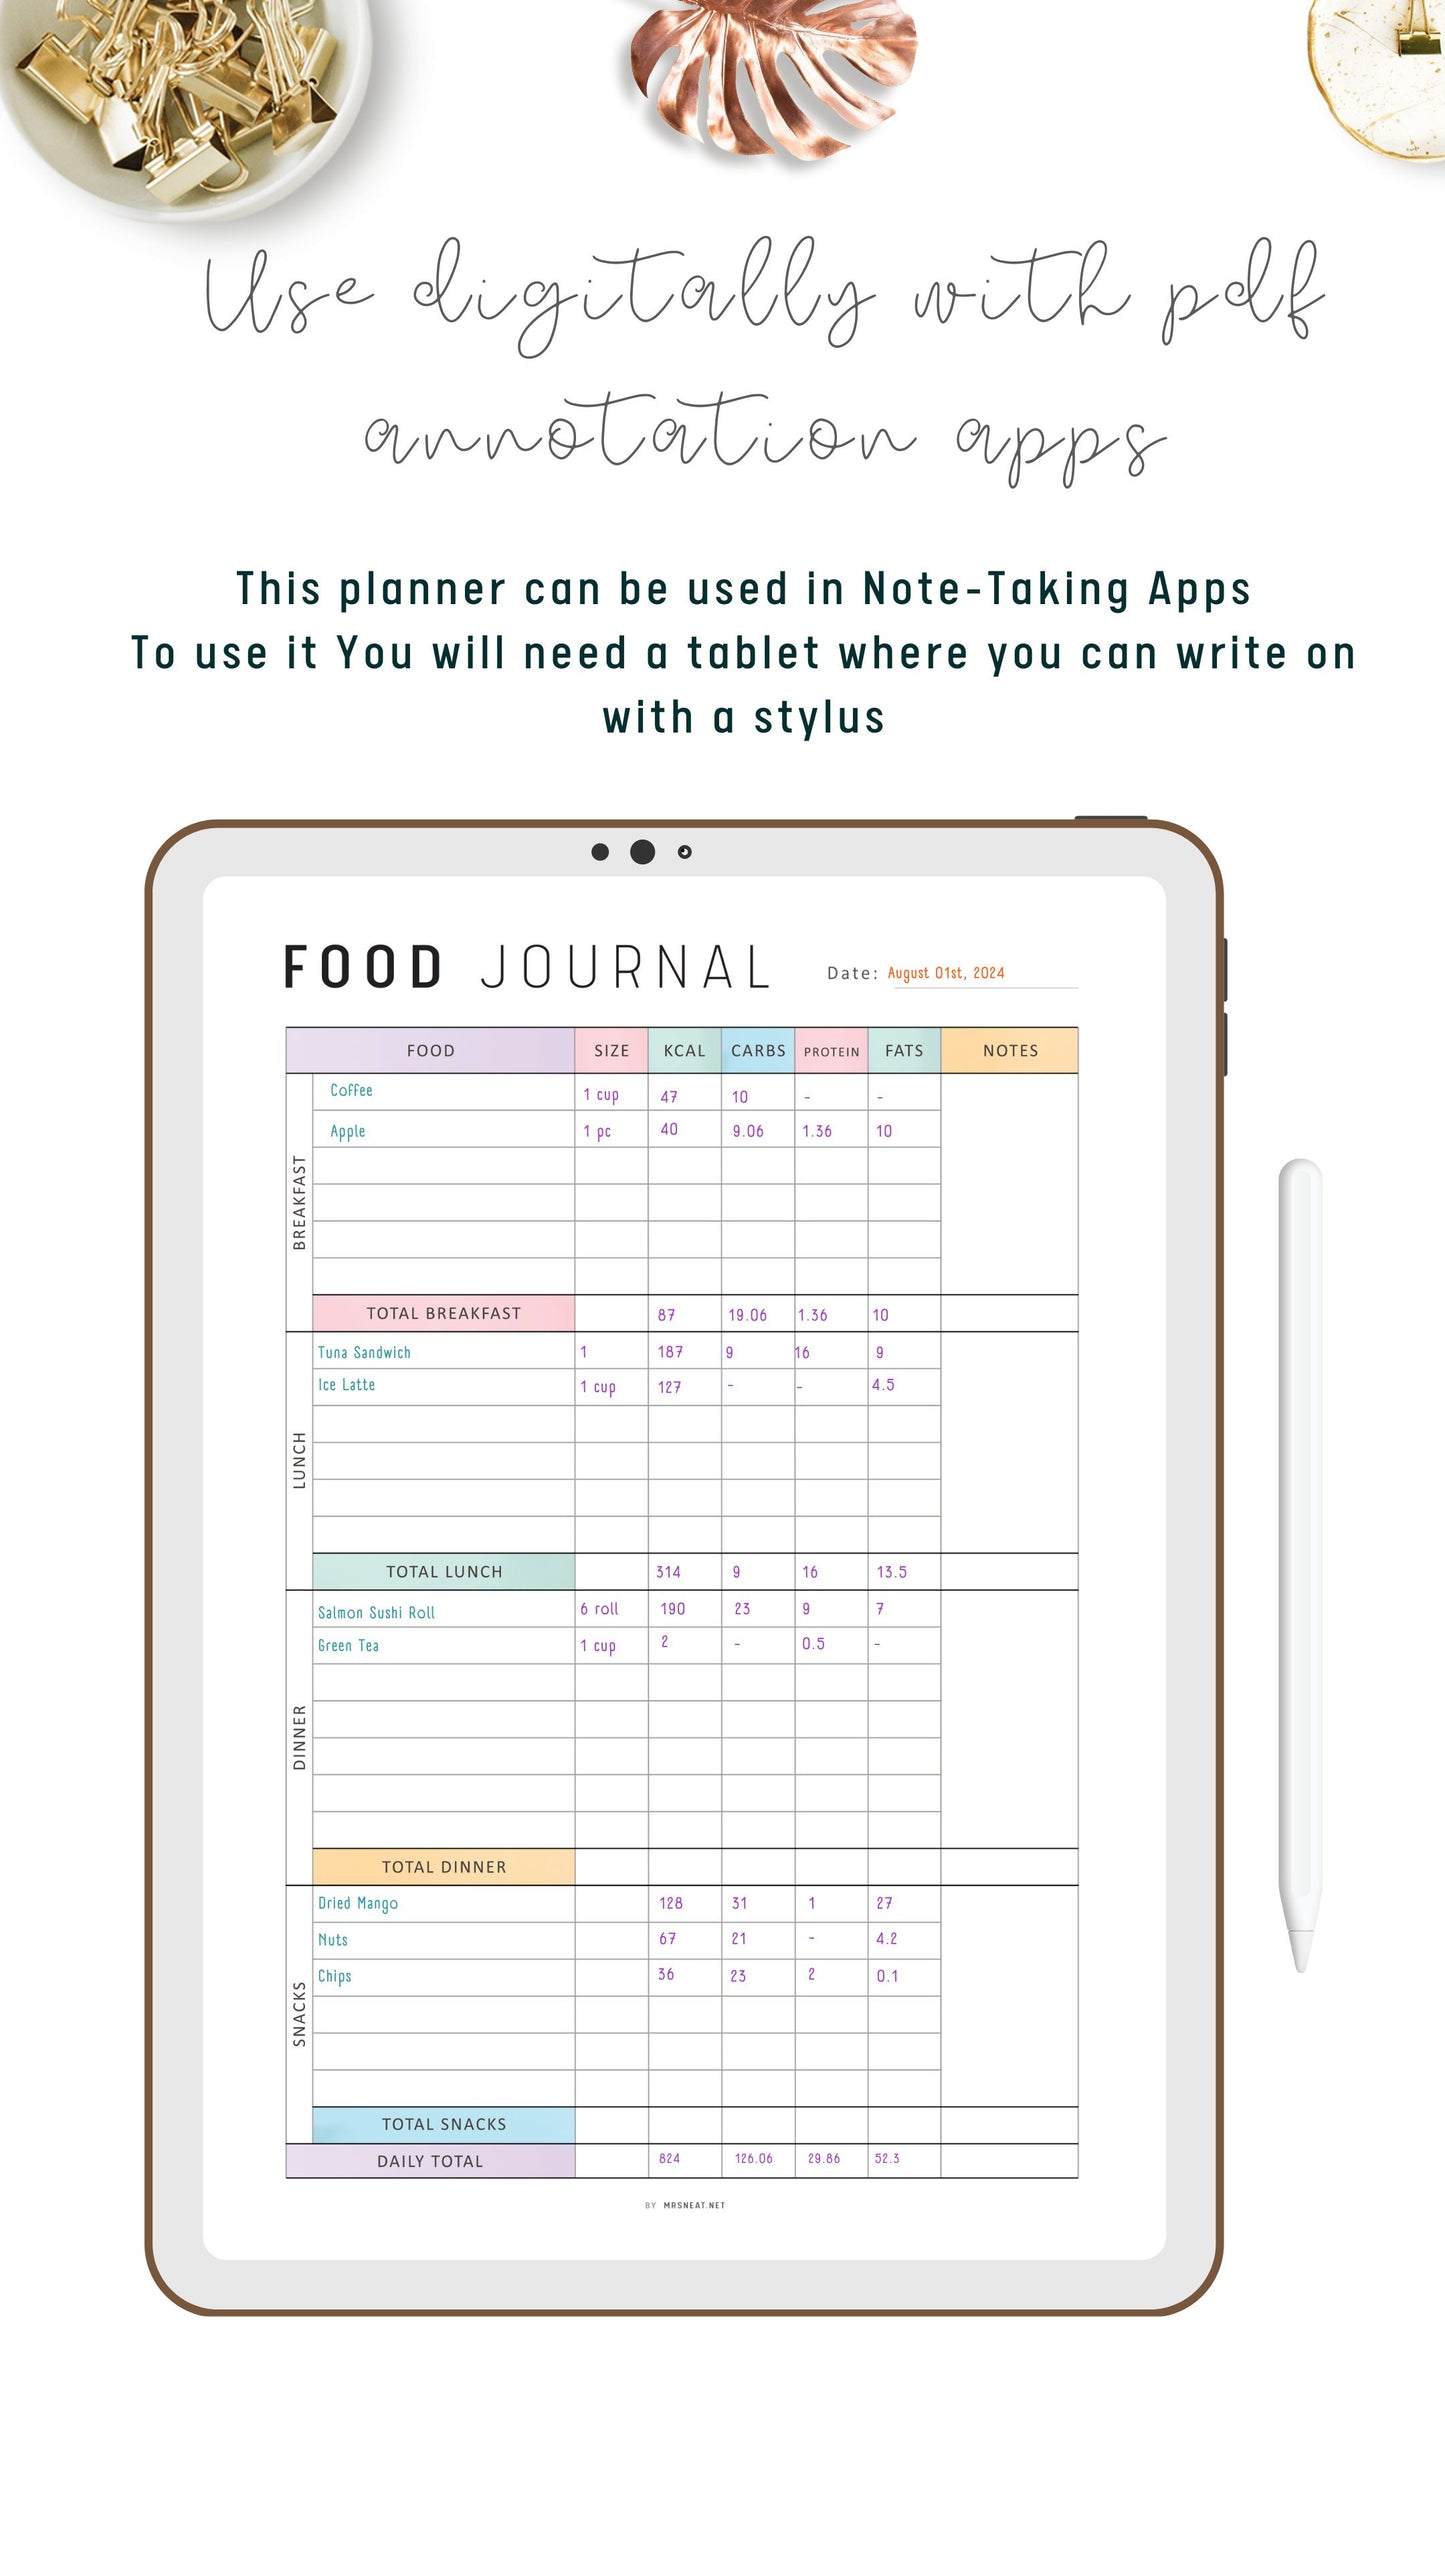 Digital Daily Calorie Tracker Template, Calorie Counter PDF, My Food Diary, Digital Daily Food Journal, A4, A5, Letter, Half Letter, Colorful Page